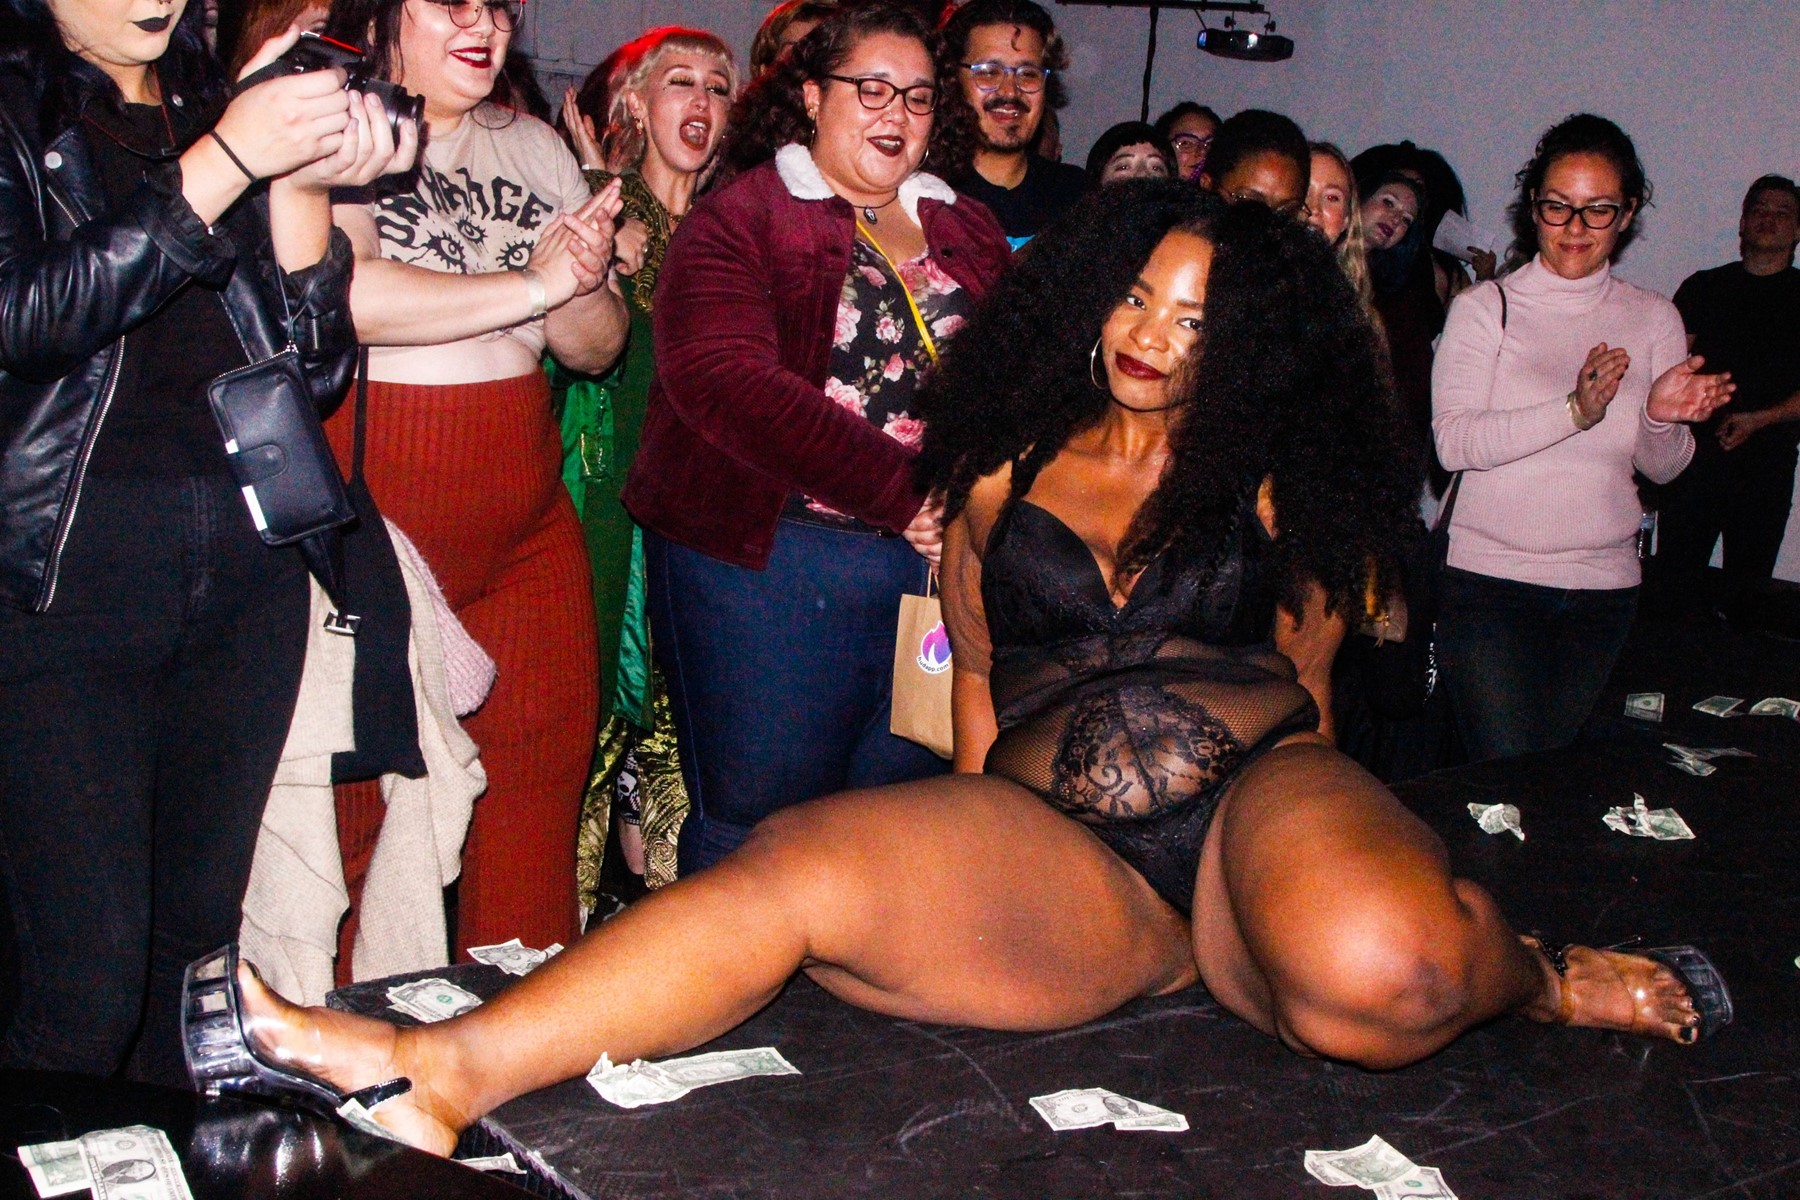 The body positive LA strip show founded by plus size women Dazed picture